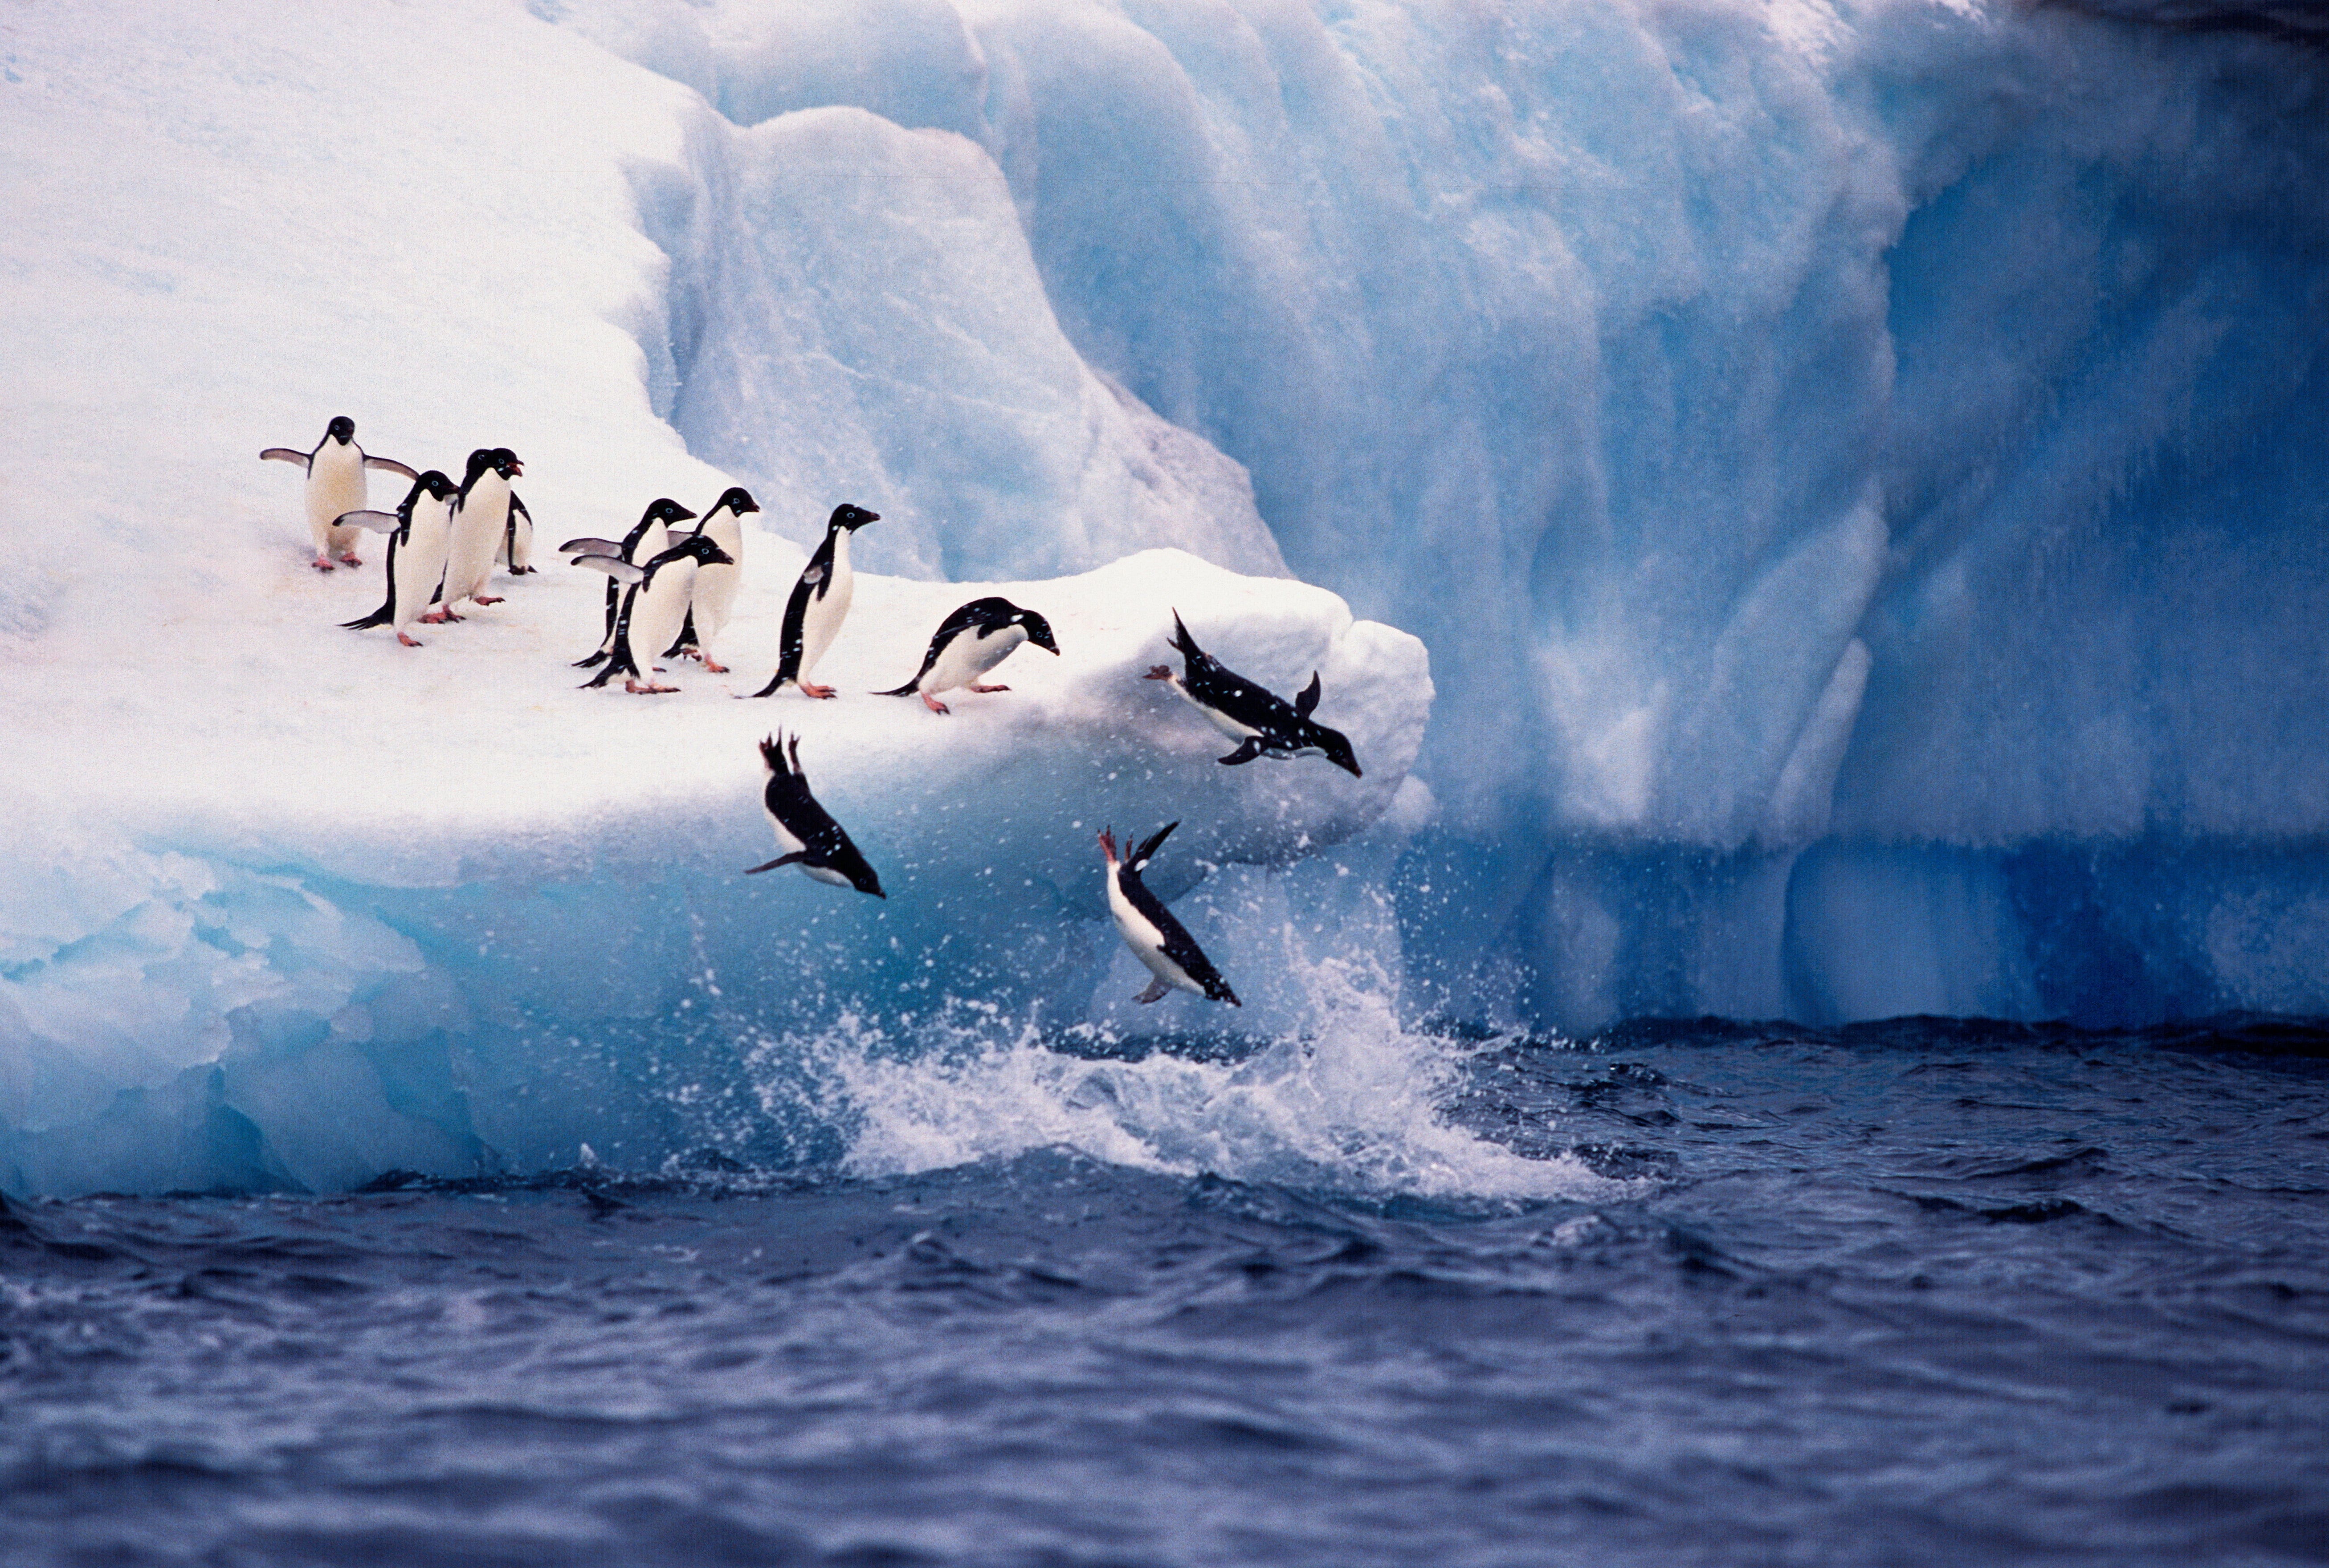 Prepare to take a polar plunge into the icy waters of the Antarctic Peninsula